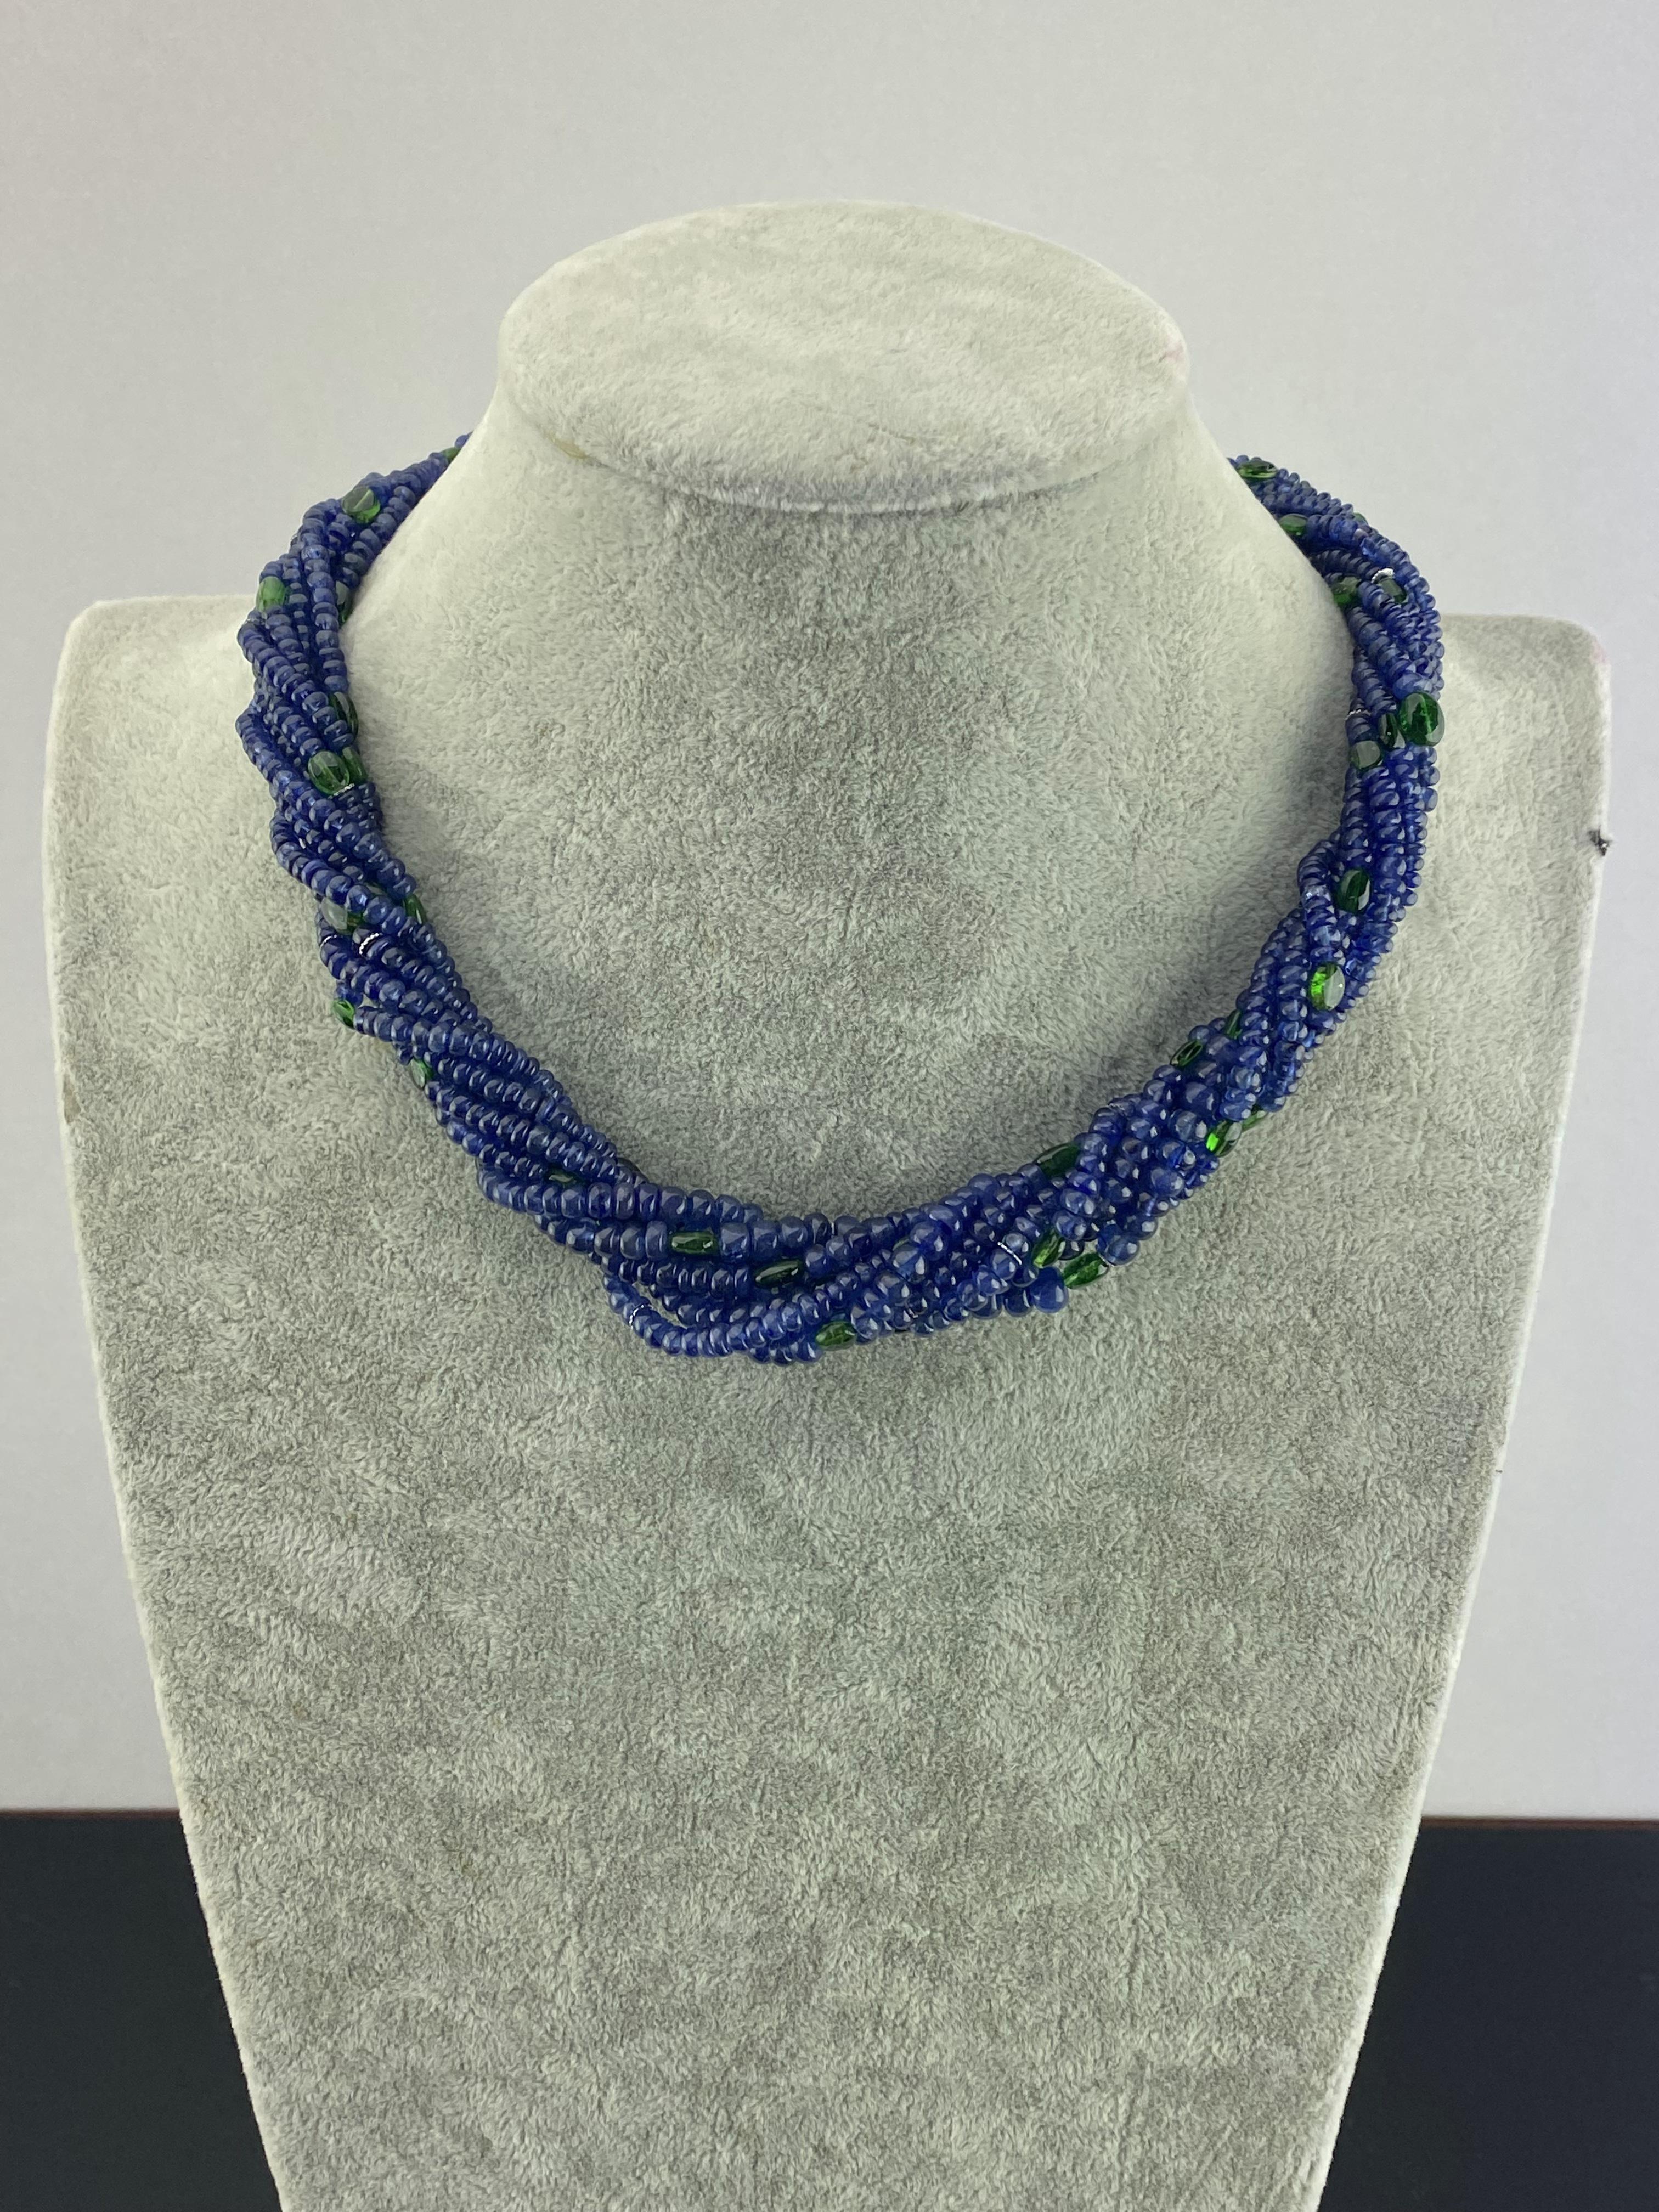 420 carat Blue Sapphire beads and 37 carat Emerald beads necklace, with a 14K White Gold clasp, studded with White Diamonds. The total length of the necklace is around 20 inches, and it can be customized/altered. 
We provide free shipping. We accept